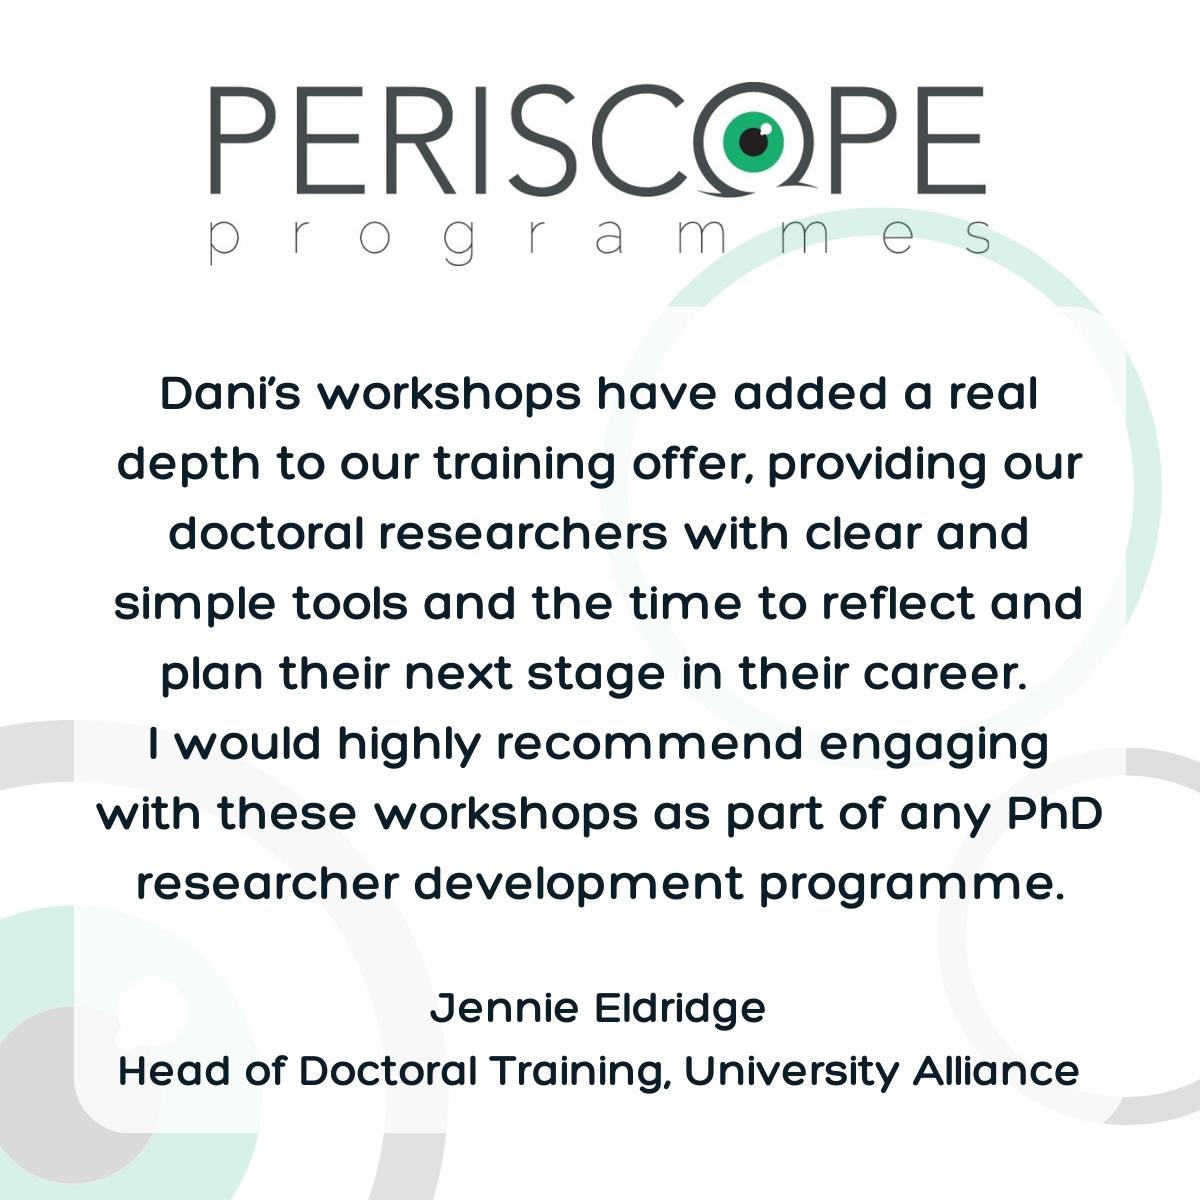 We are proud to work with# academics & #graduates (inc #PhD, #PGR, #MA & #ECR) who want to clarify their professional focus, evaluate their #transferableskills & create a #careerstrategy to transition into work. Please visit periscopeprogrammes.com to find out more.